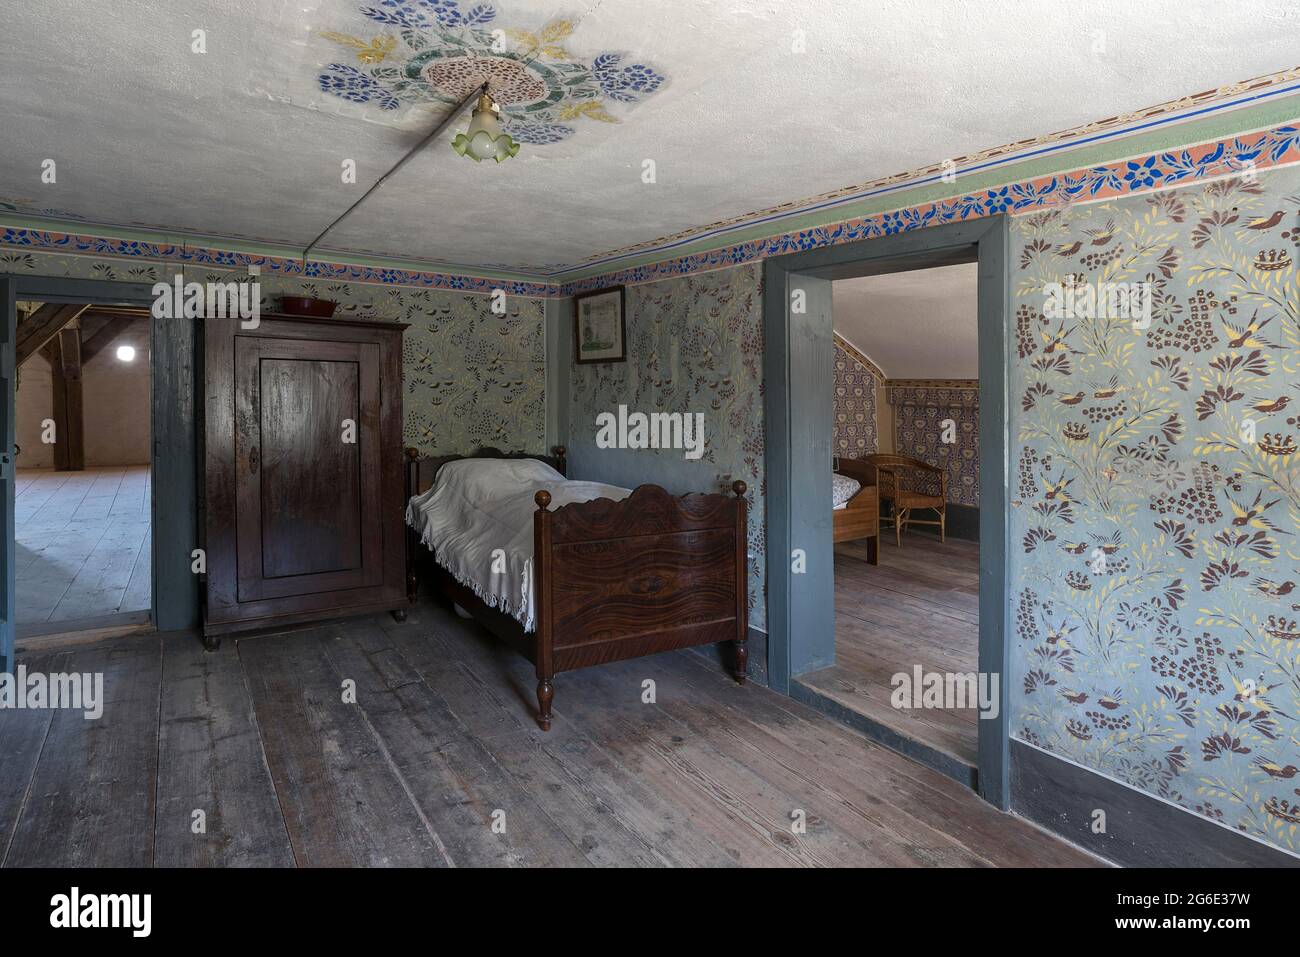 Sleeping chambers in a historic farmhouse, Franconian Open Air Museum, Bad Windsheim, Middle Franconia, Bavaria, Germany Stock Photo